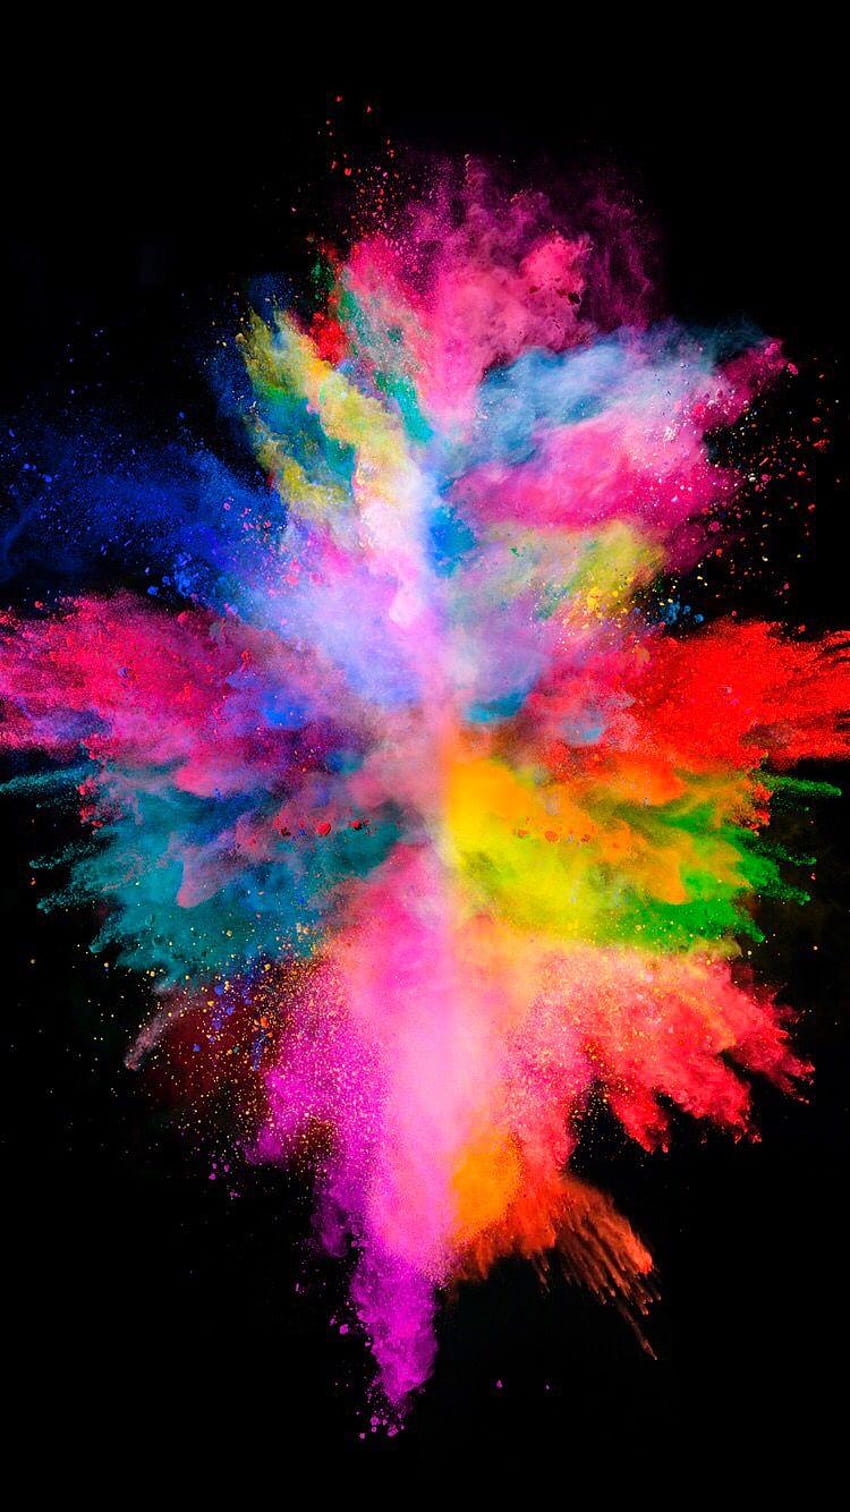 Colorful explosion on the black backgrounds for your iPhone, most colourful iphone HD phone wallpaper